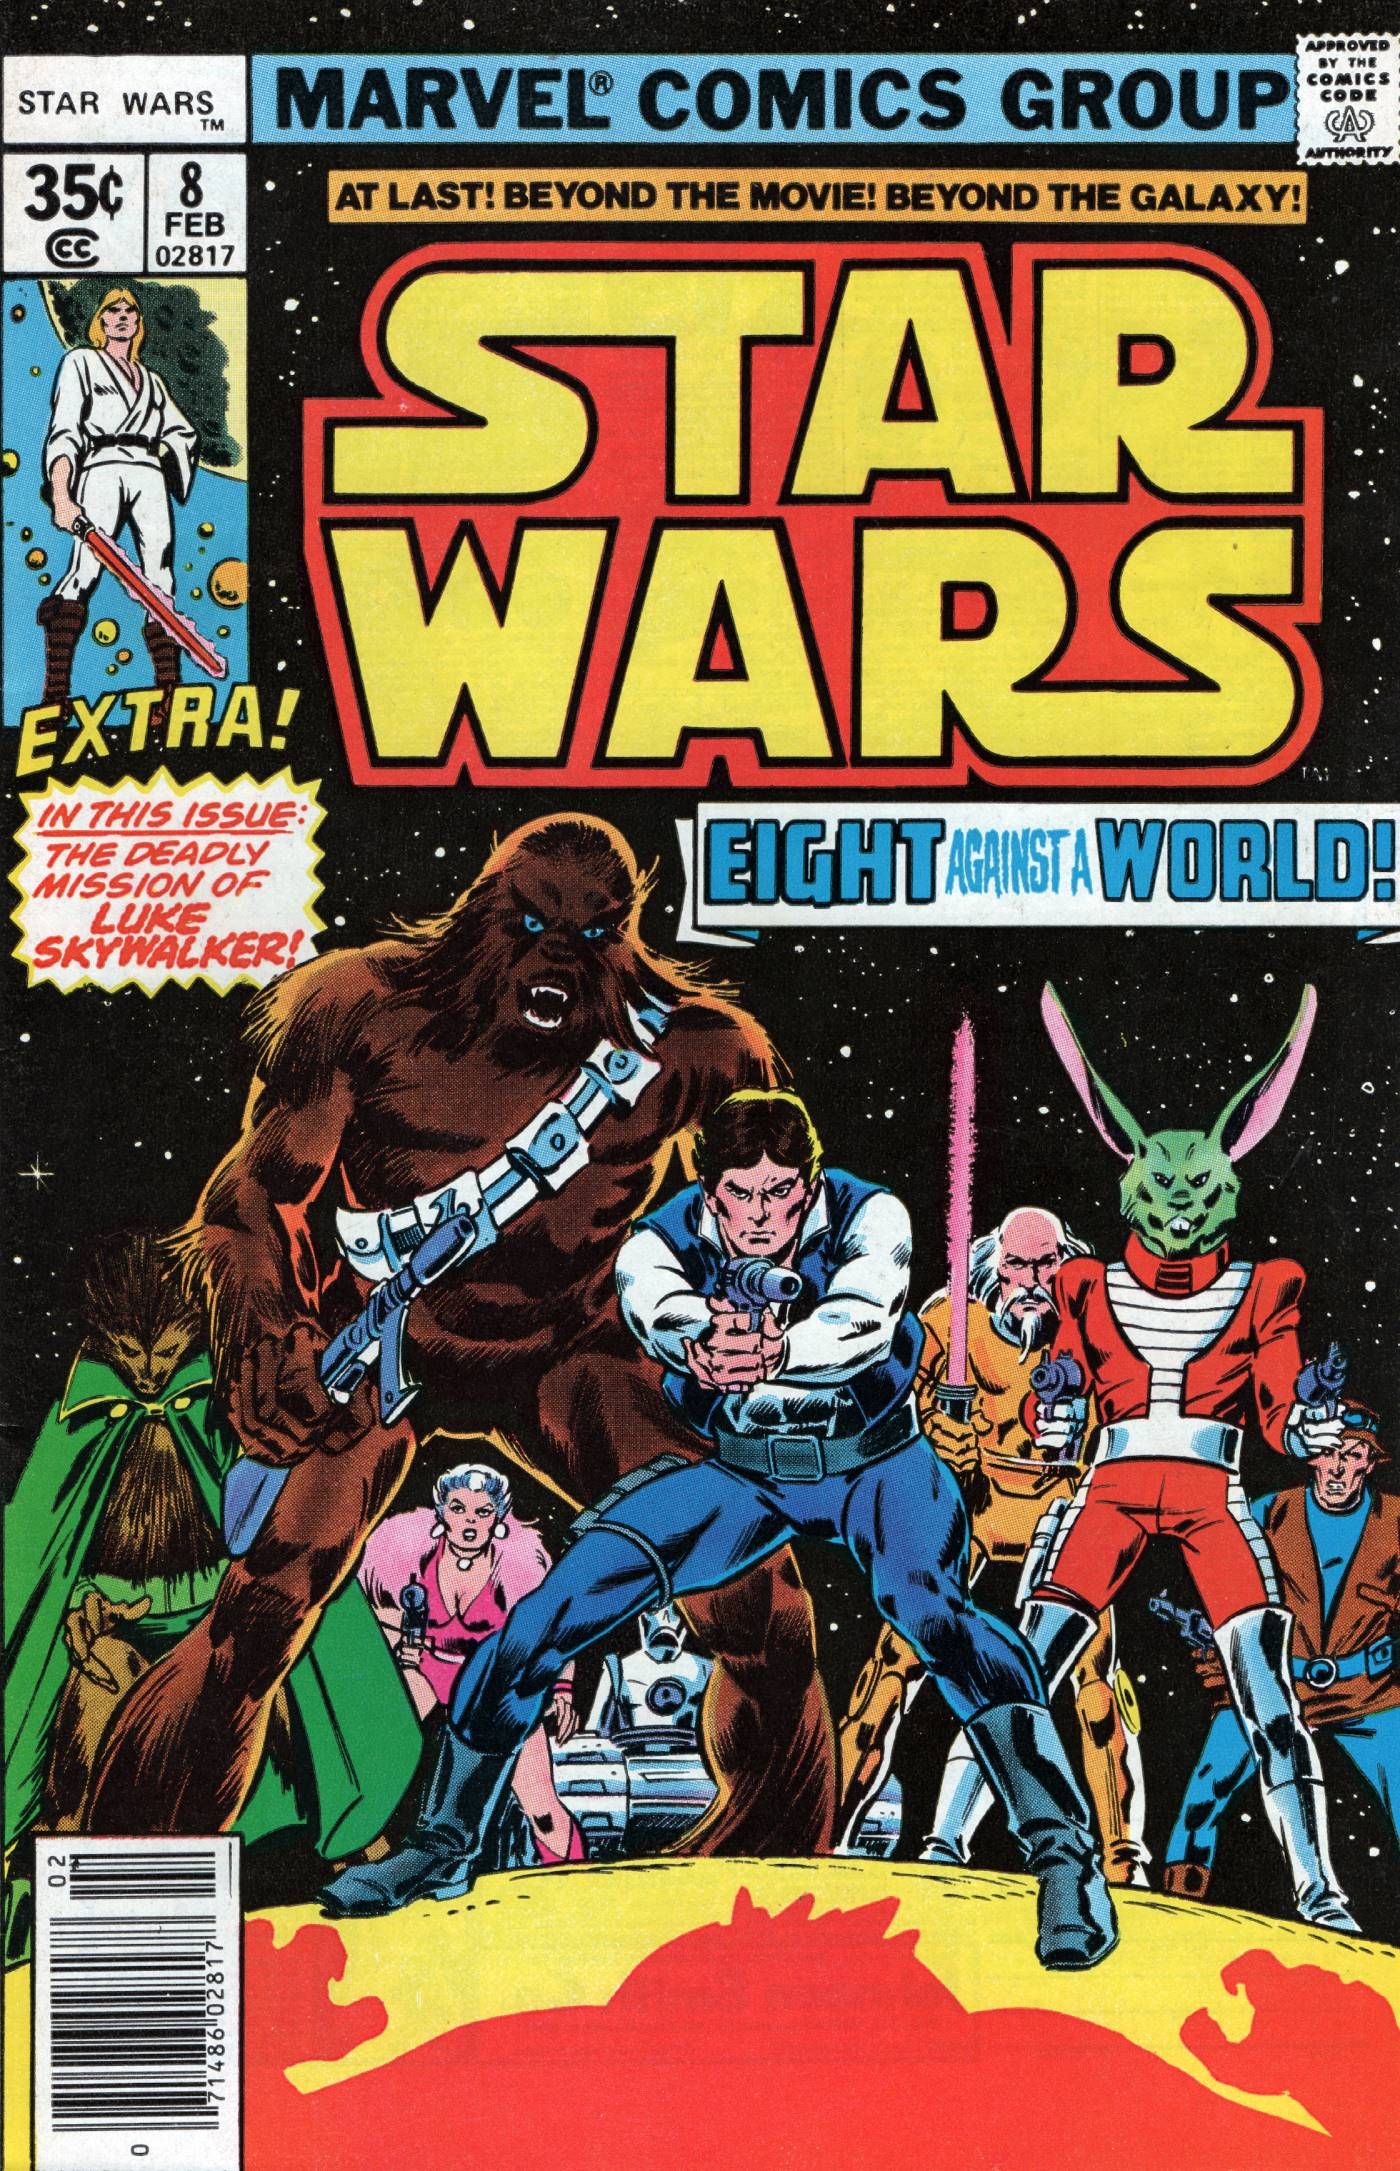 Star Wars Needs To Confirm A Multiverse For Next Comic Event